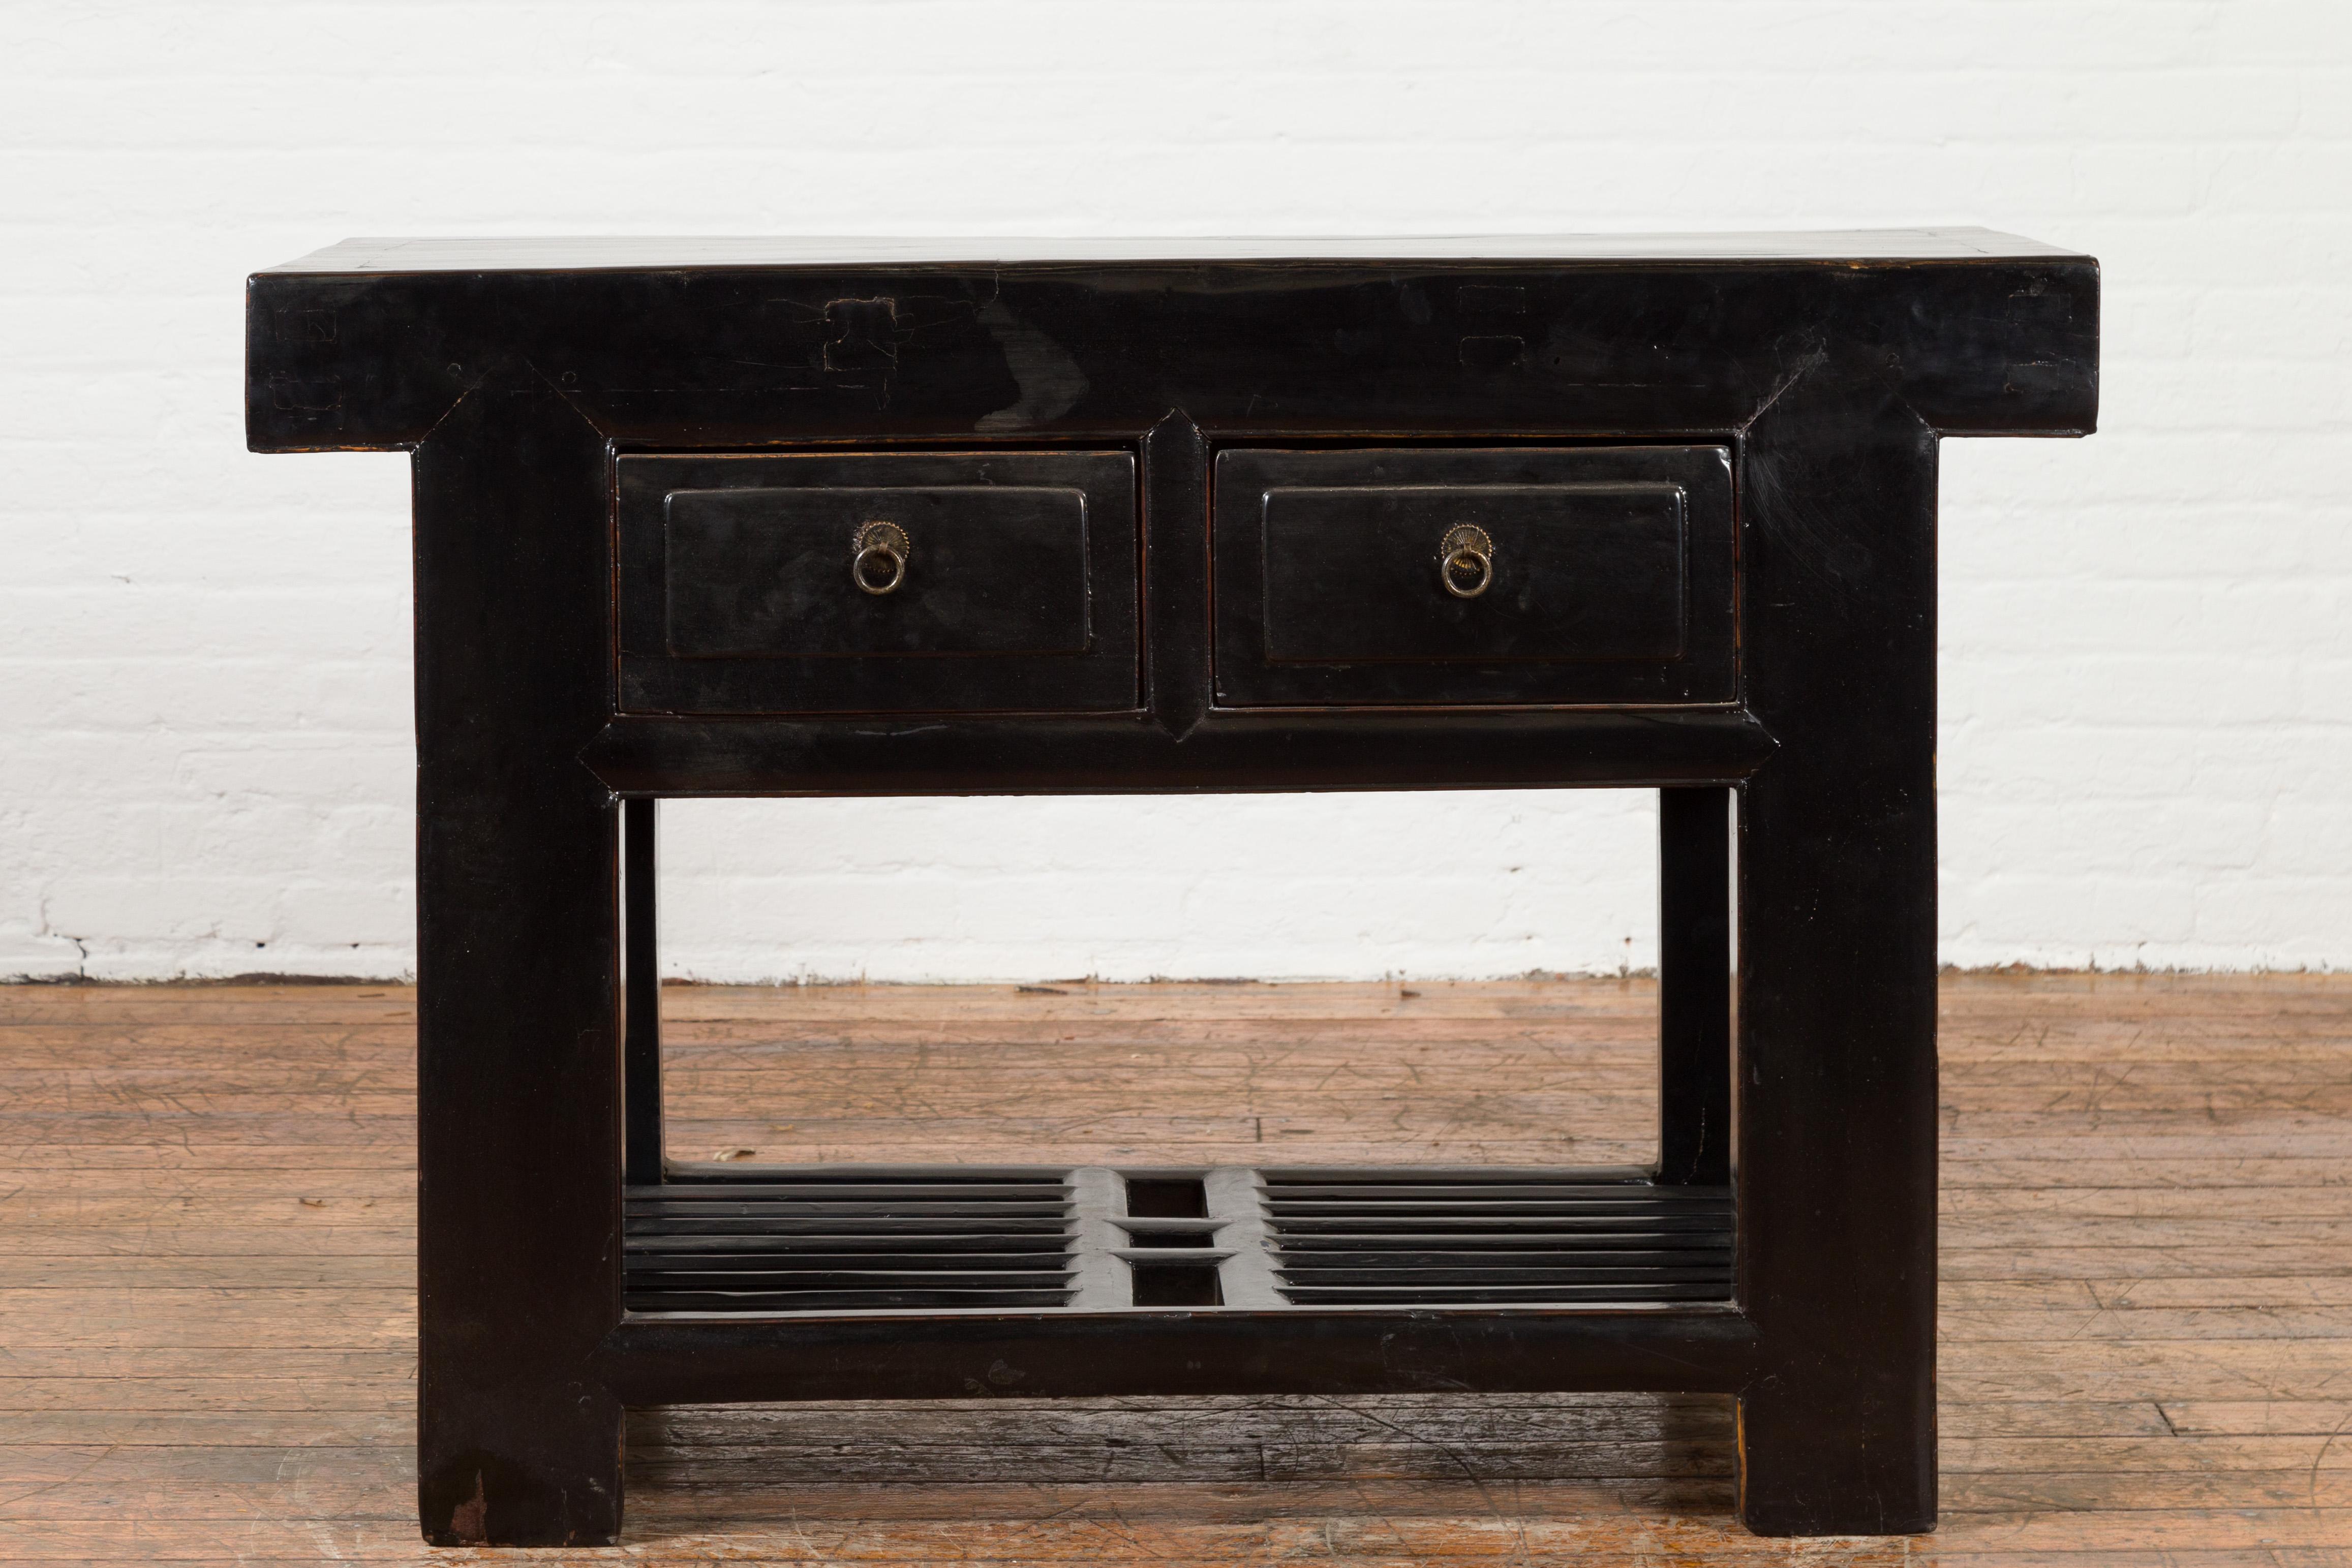 A Chinese black lacquered table from the early 20th century, with two drawers and open slatted shelf. Created in China during the early years of the 20th century, this console table features a rectangular top with central board, sitting above two